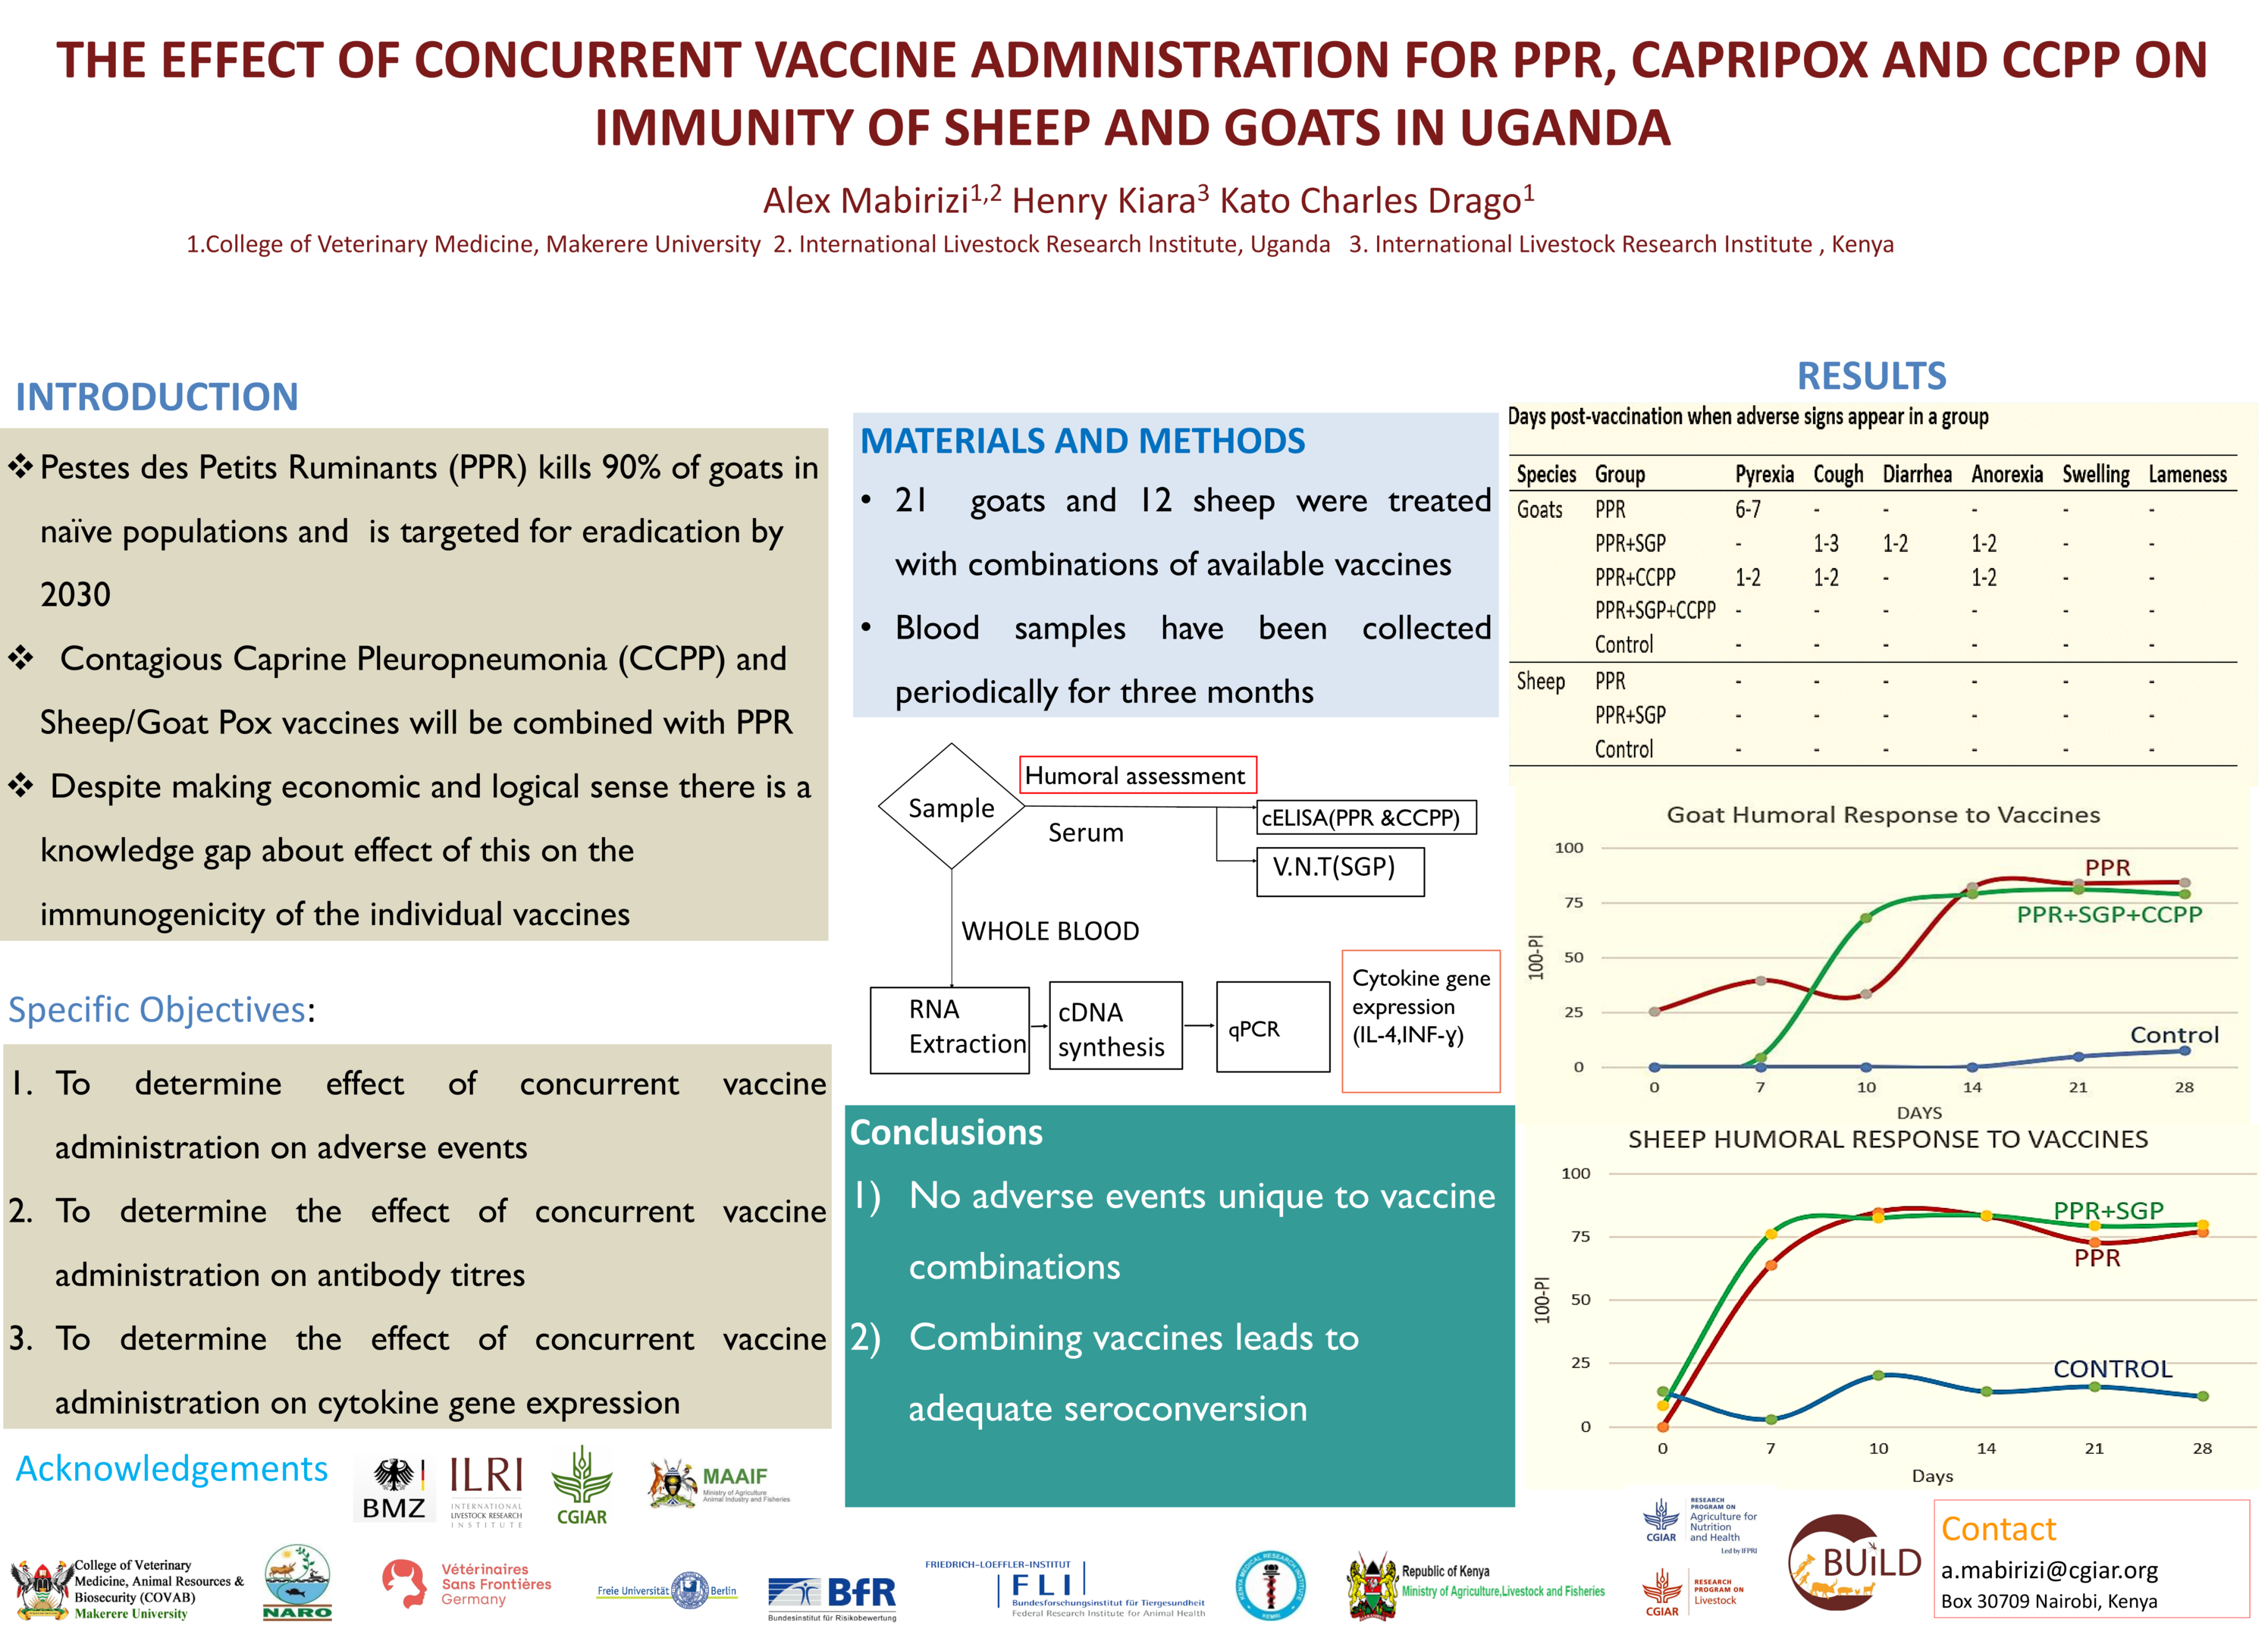 THE EFFECT OF CONCURRENT VACCINE ADMINISTRATION FOR PPR, CAPRIPOX AND CCPP ON  IMMUNITY OF SHEEP AND GOATS IN UGANDA